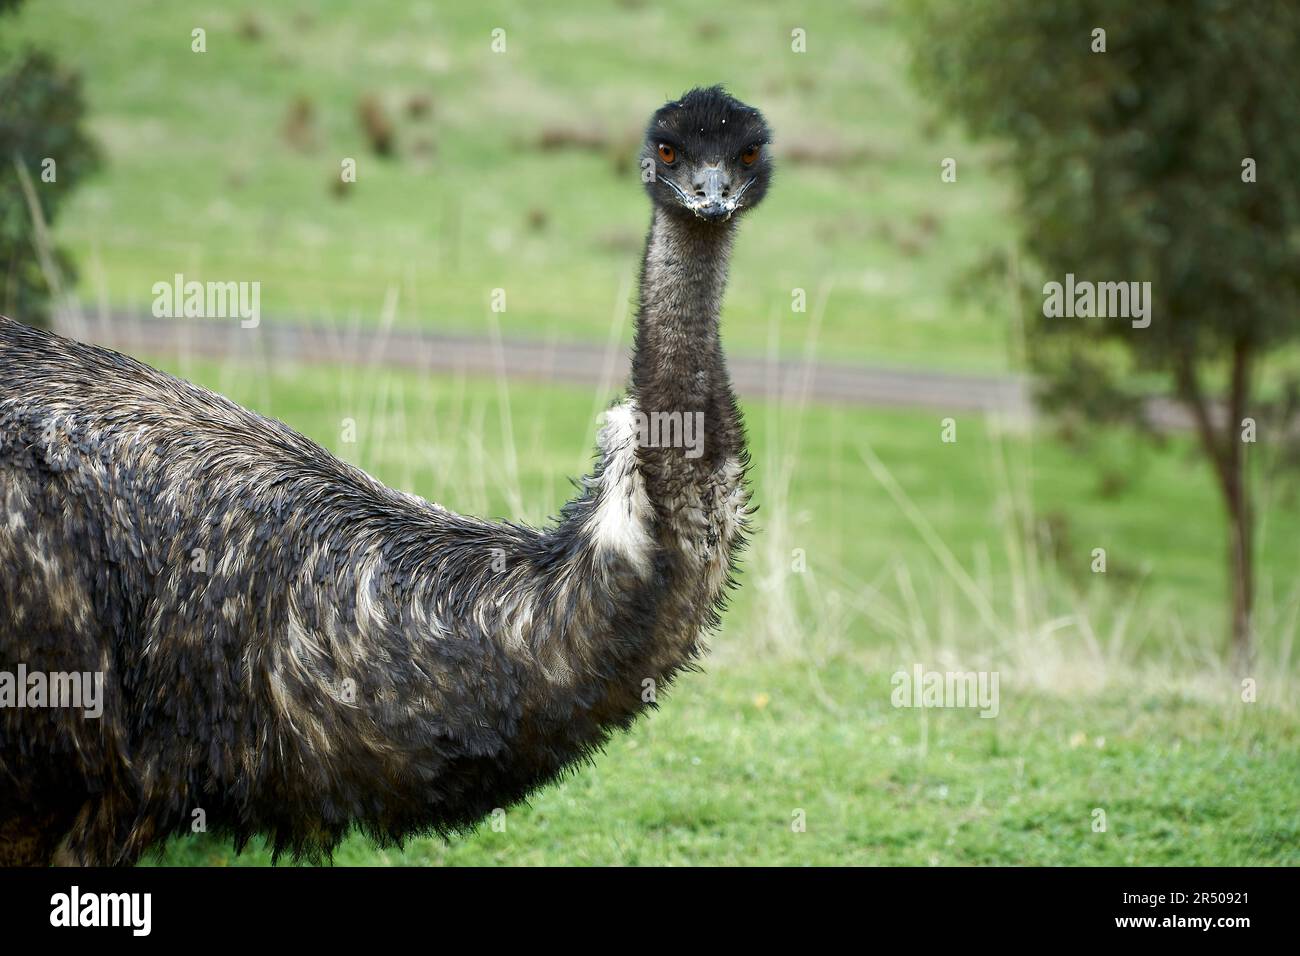 A head and neck shot of a single wild Emu looking straight at the camera Stock Photo